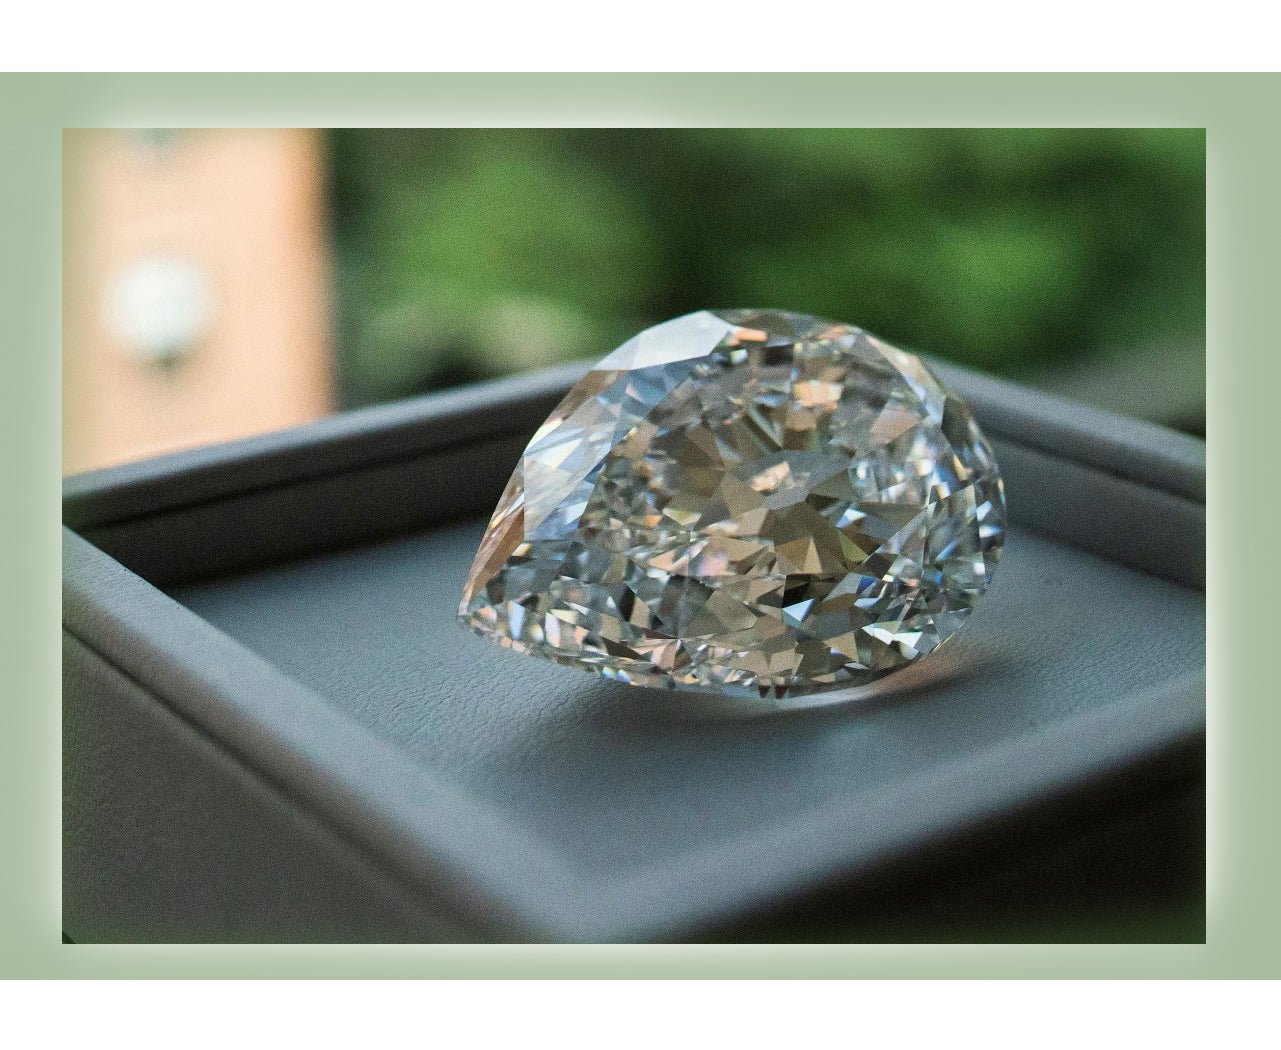 "This is a Truly Symbolic Moment" - A Rare Pear-Shaped Diamond Sold for $12 Million in Cryptocurrency - DSF Antique Jewelry